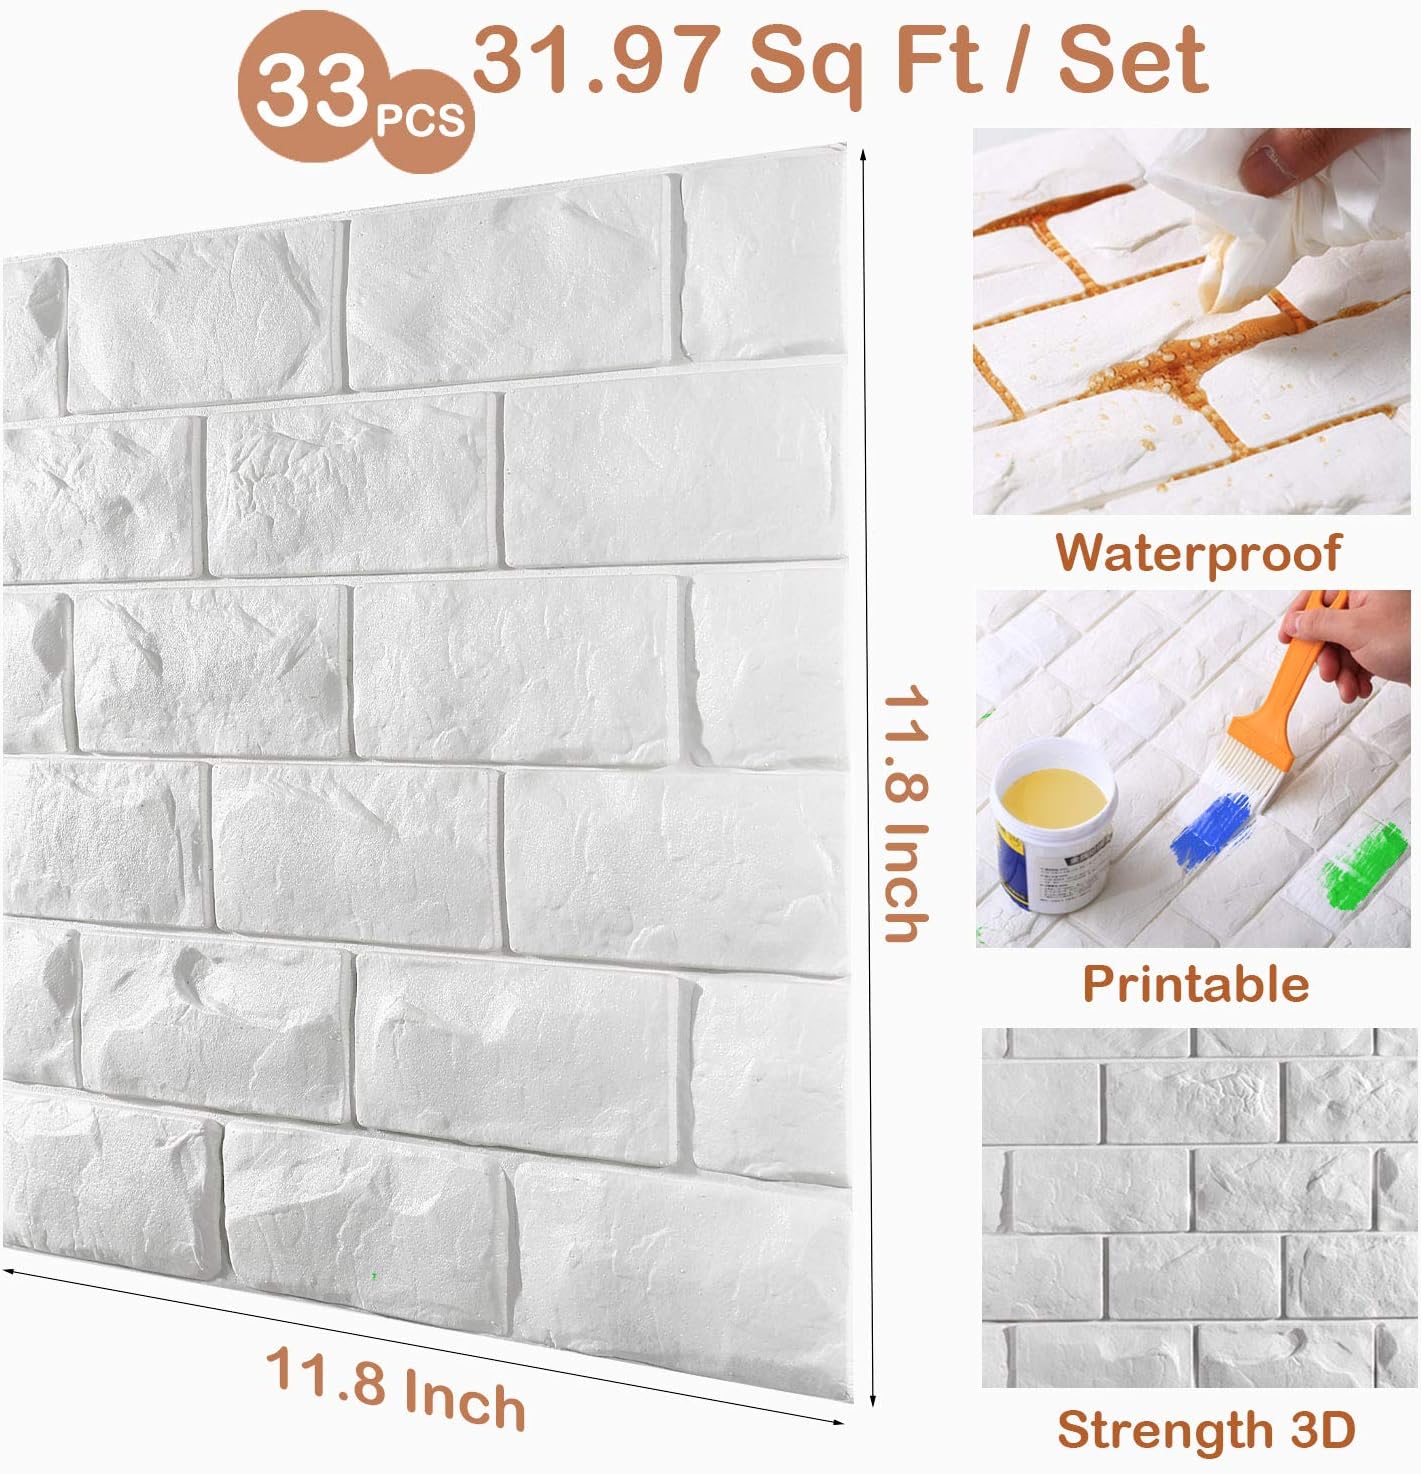 30 Pcs 3D Wall Panels, White Brick Printable 3D Wallpaper Stick and Peel, Self Adhesive Waterproof Foam Faux Brick Paneling for Bedroom, Bathroom, Kitchen, Fireplace (29.06 sq feet Coverage)